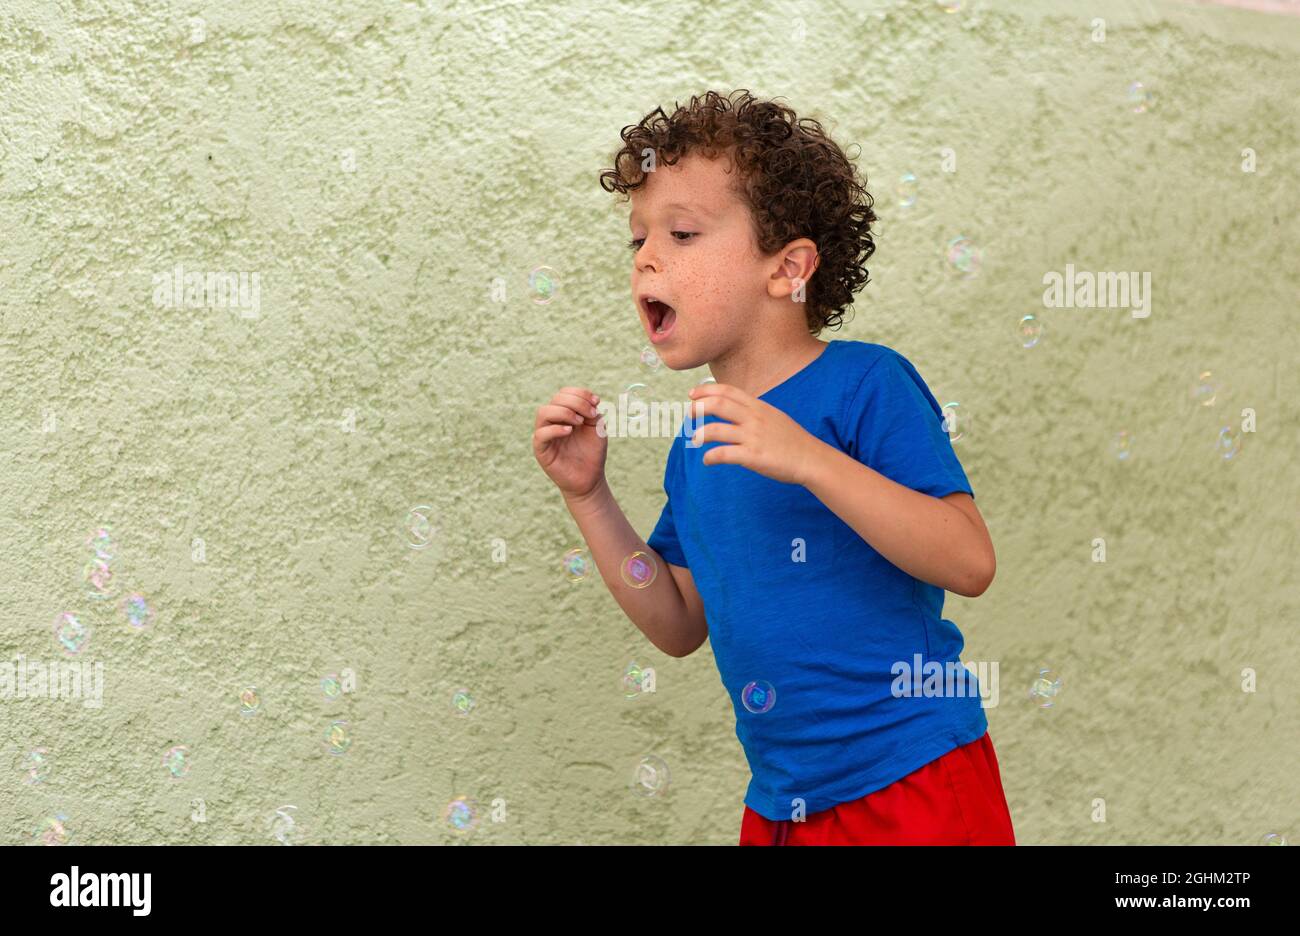 curly-haired boy with freckles playing in the backyard with soap bubbles. Stock Photo